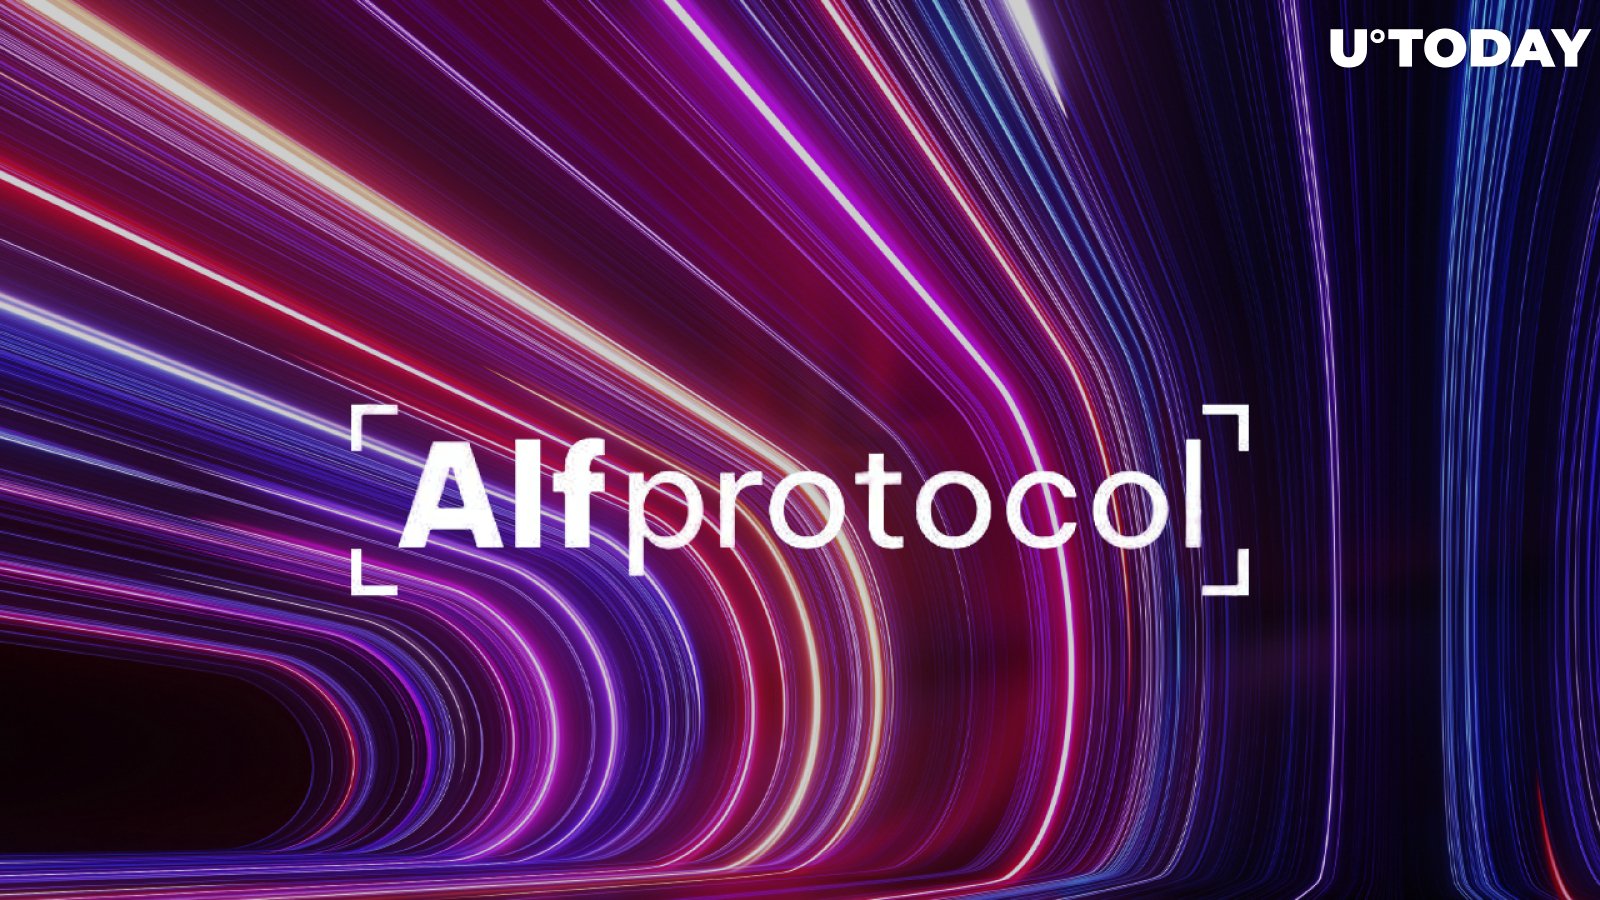 Alfprotocol Uses Both Leveraged and Unleveraged Solutions for Liquidity Providers